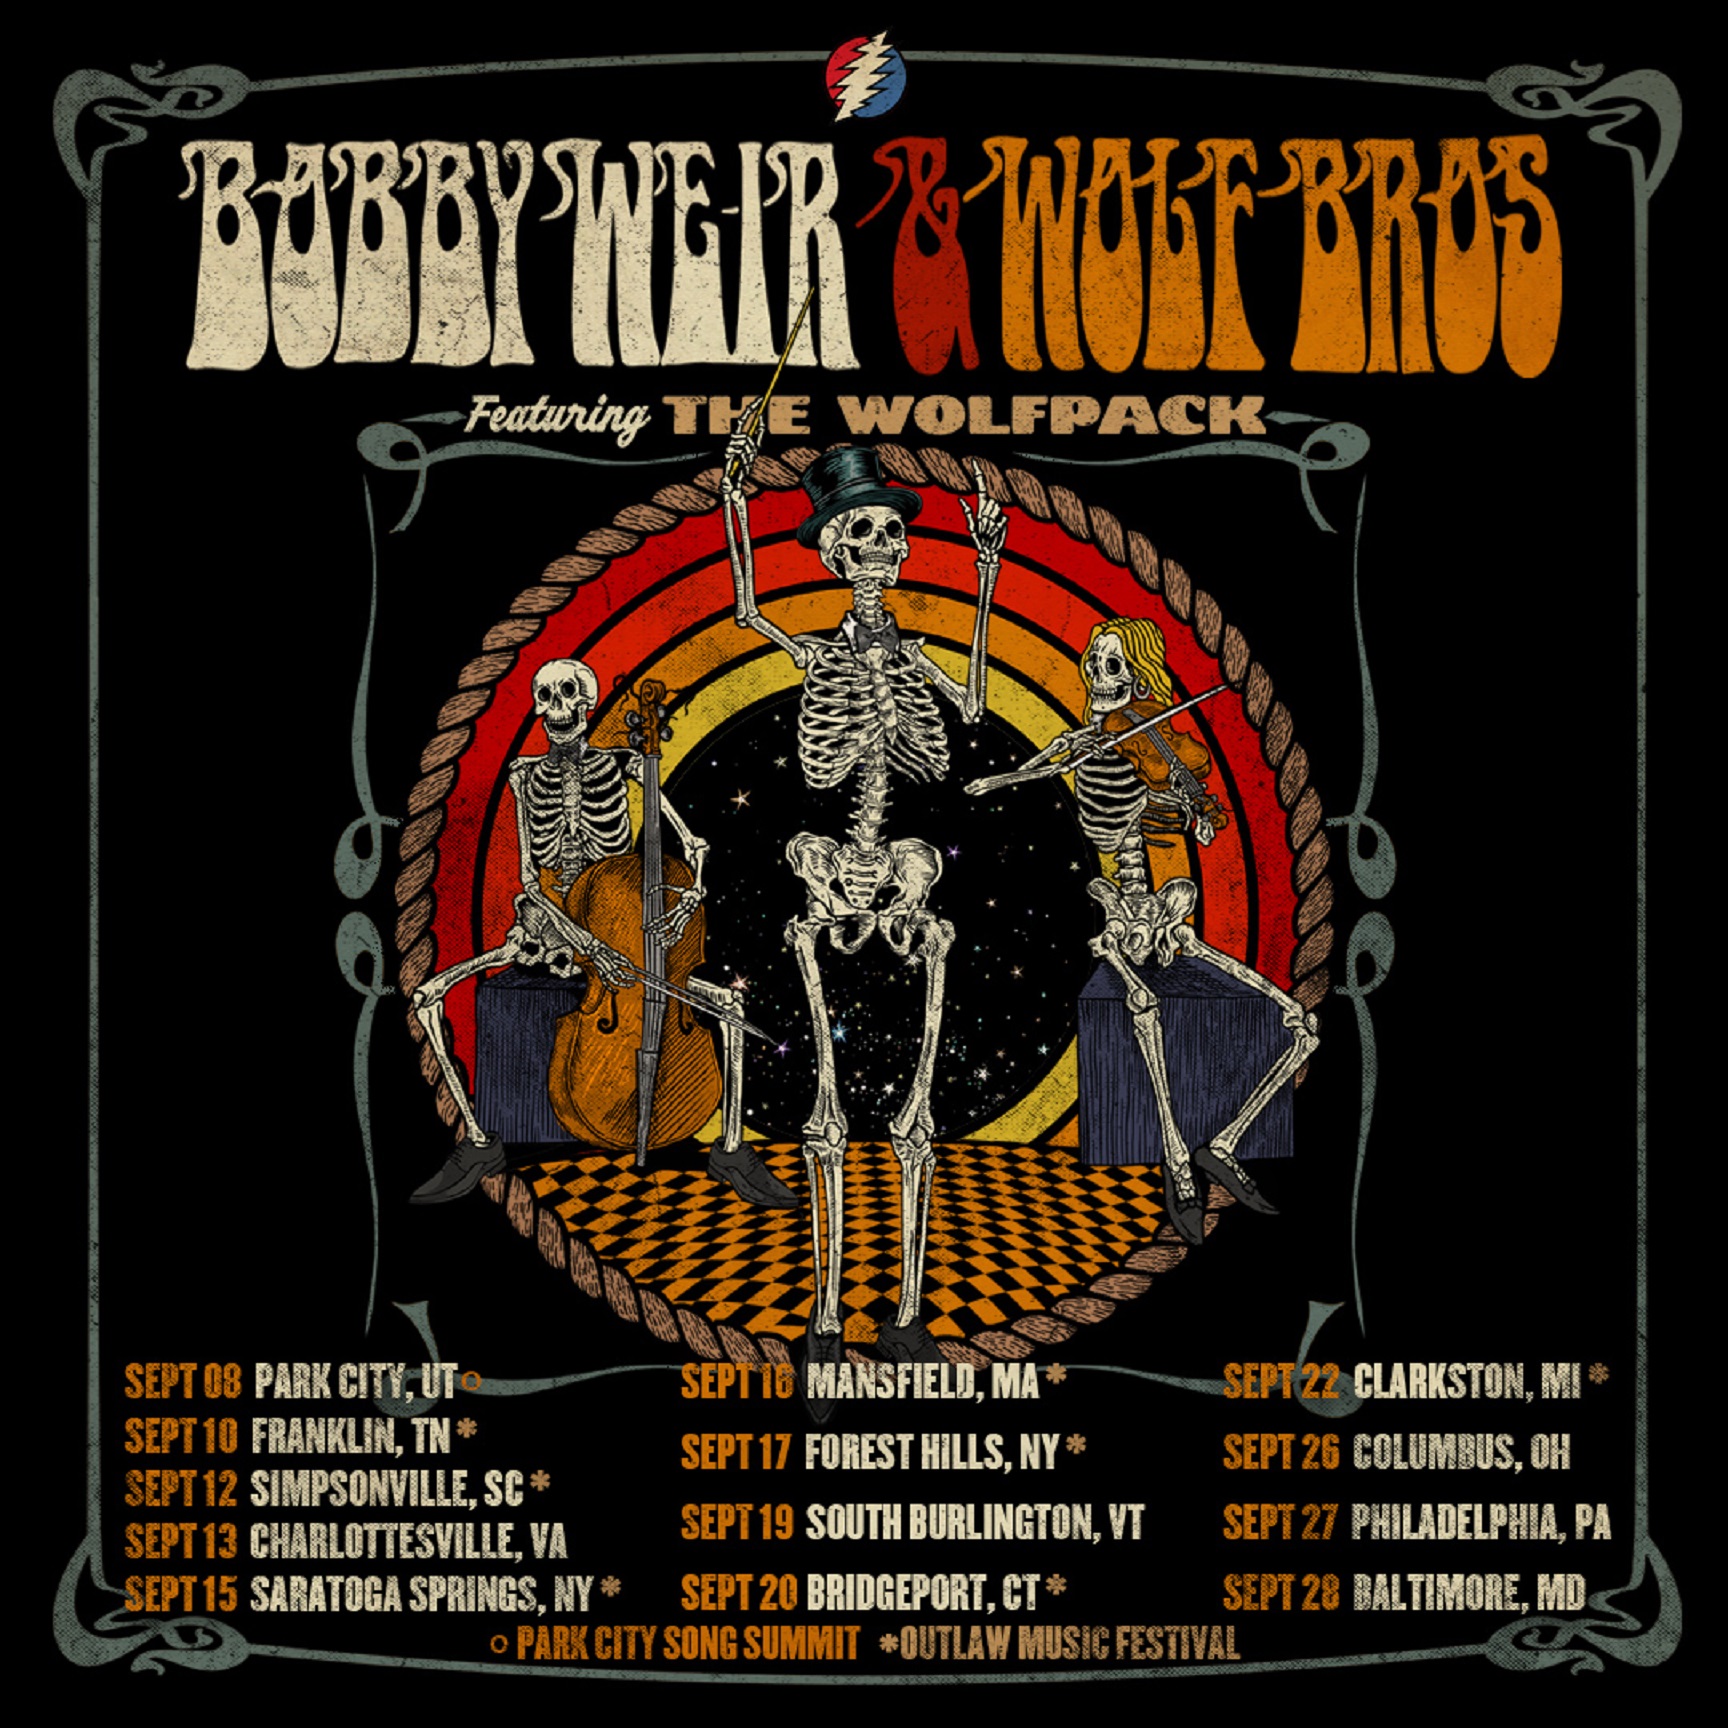 Bobby Weir & Wolf Bros confirm September tour dates, joining Willie